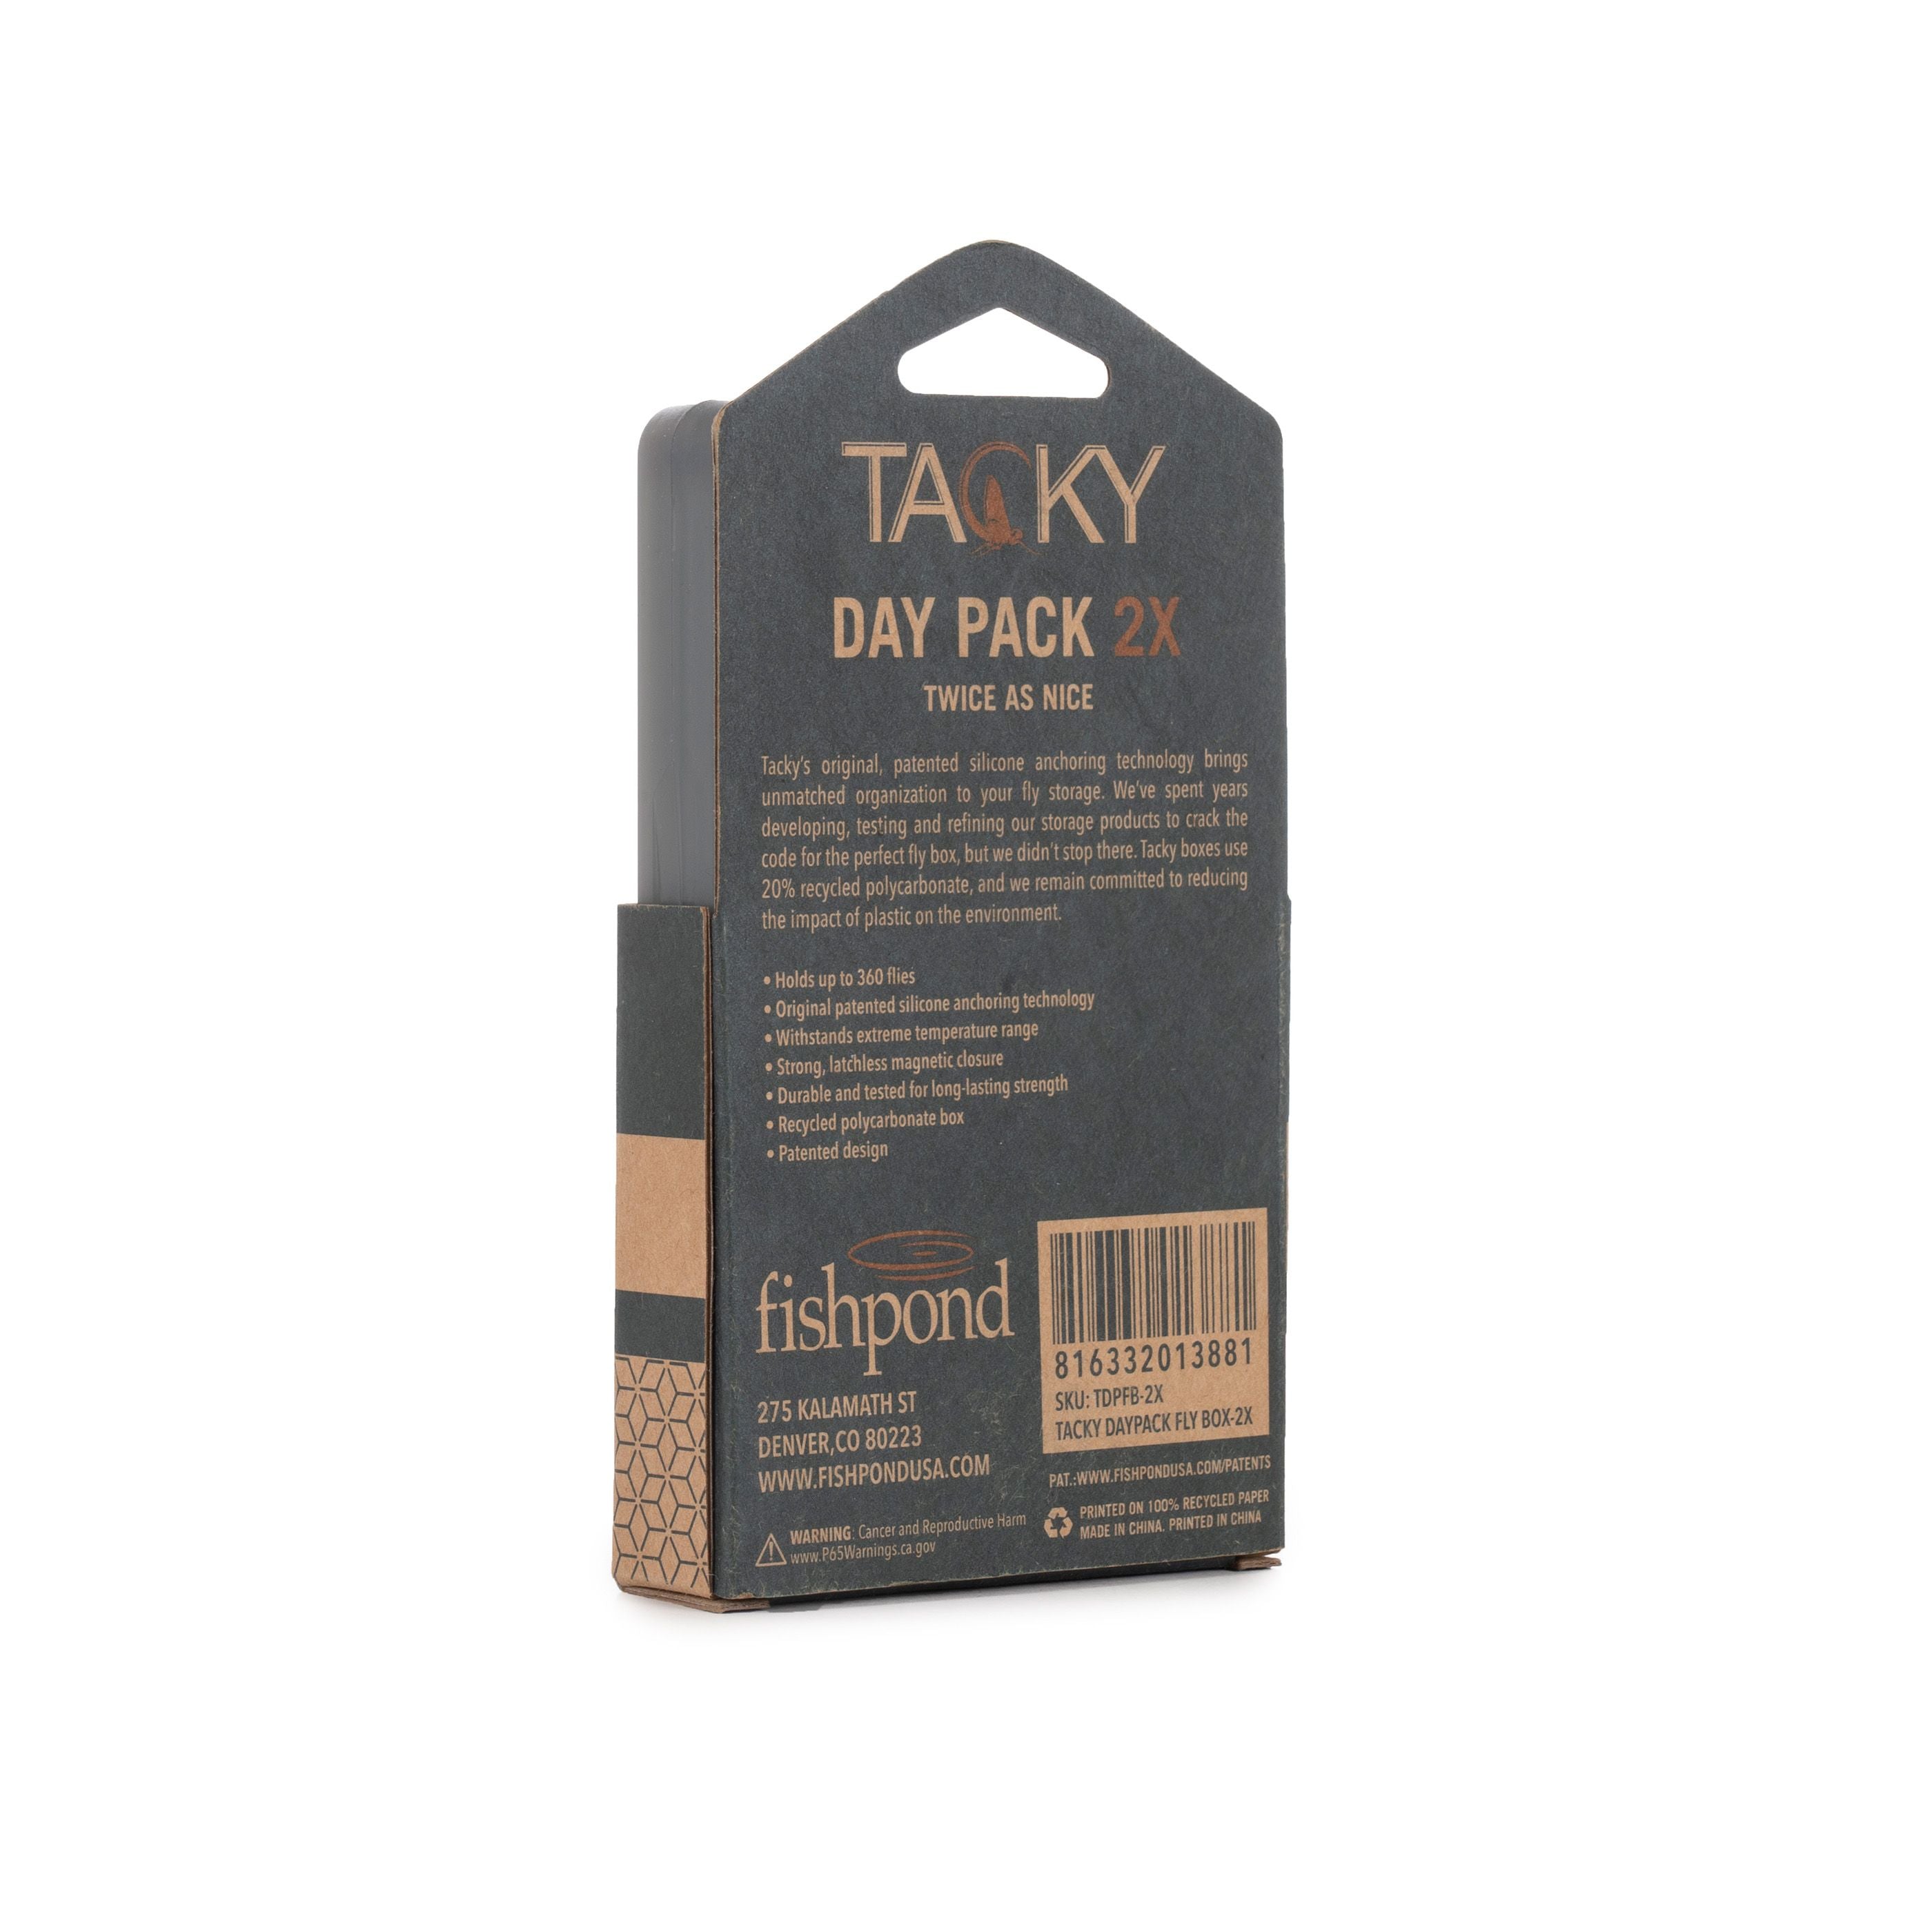 TACKY DAYPACK FLY BOX DOUBLE SIDED